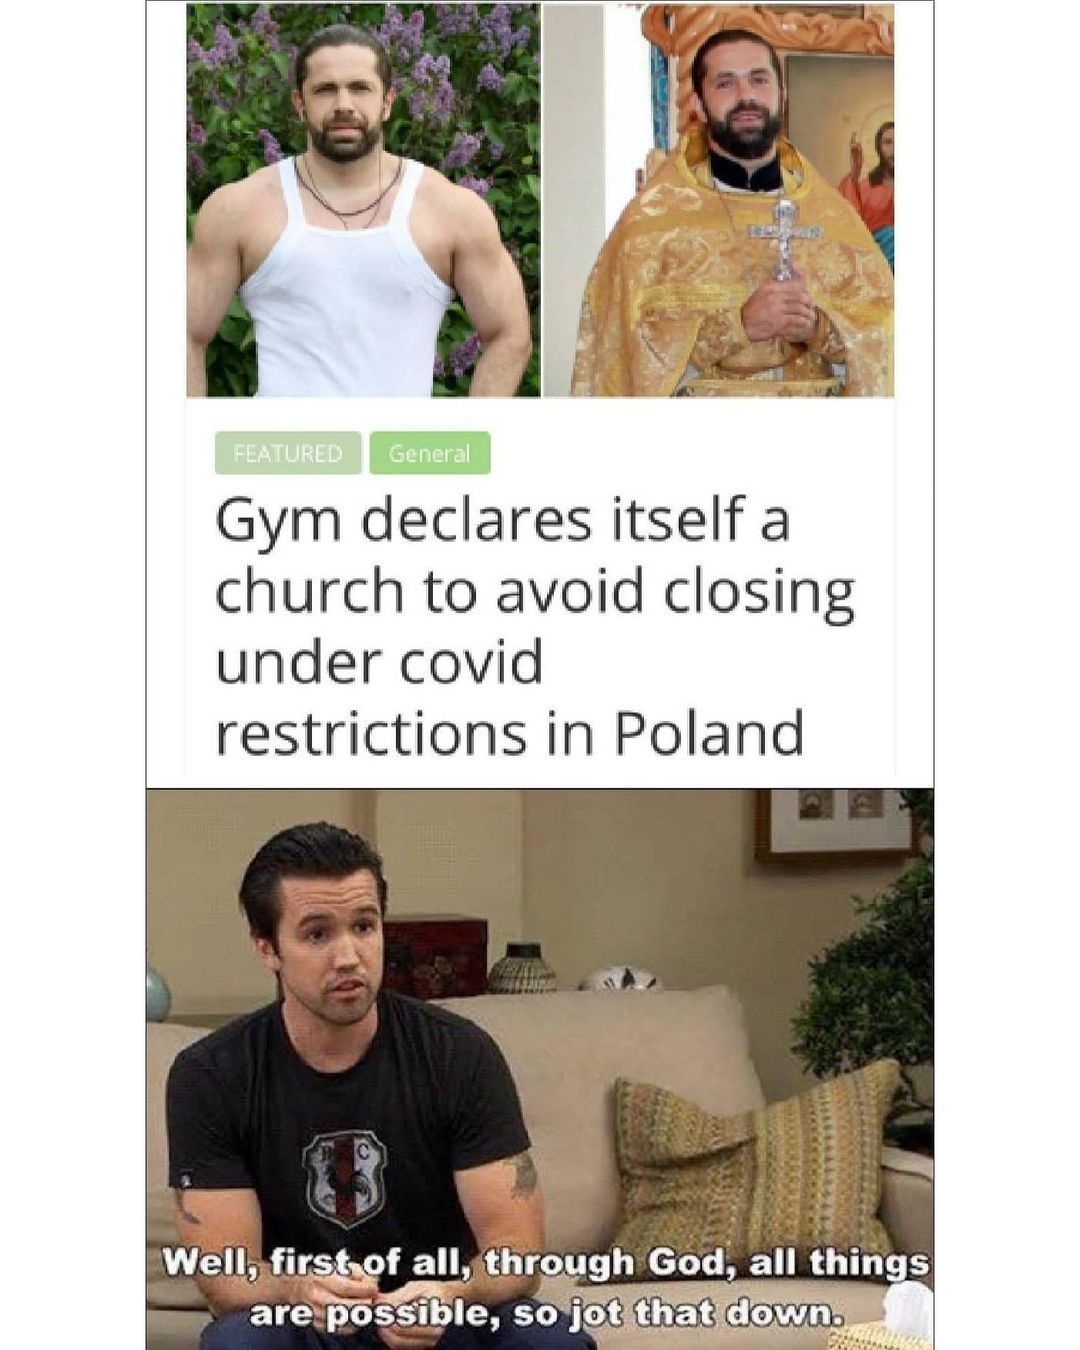 Gym declares itself a church to avoid closing under Covid restrictions in Poland.  Well, first of all, through God, all things are possible, so jot that down.